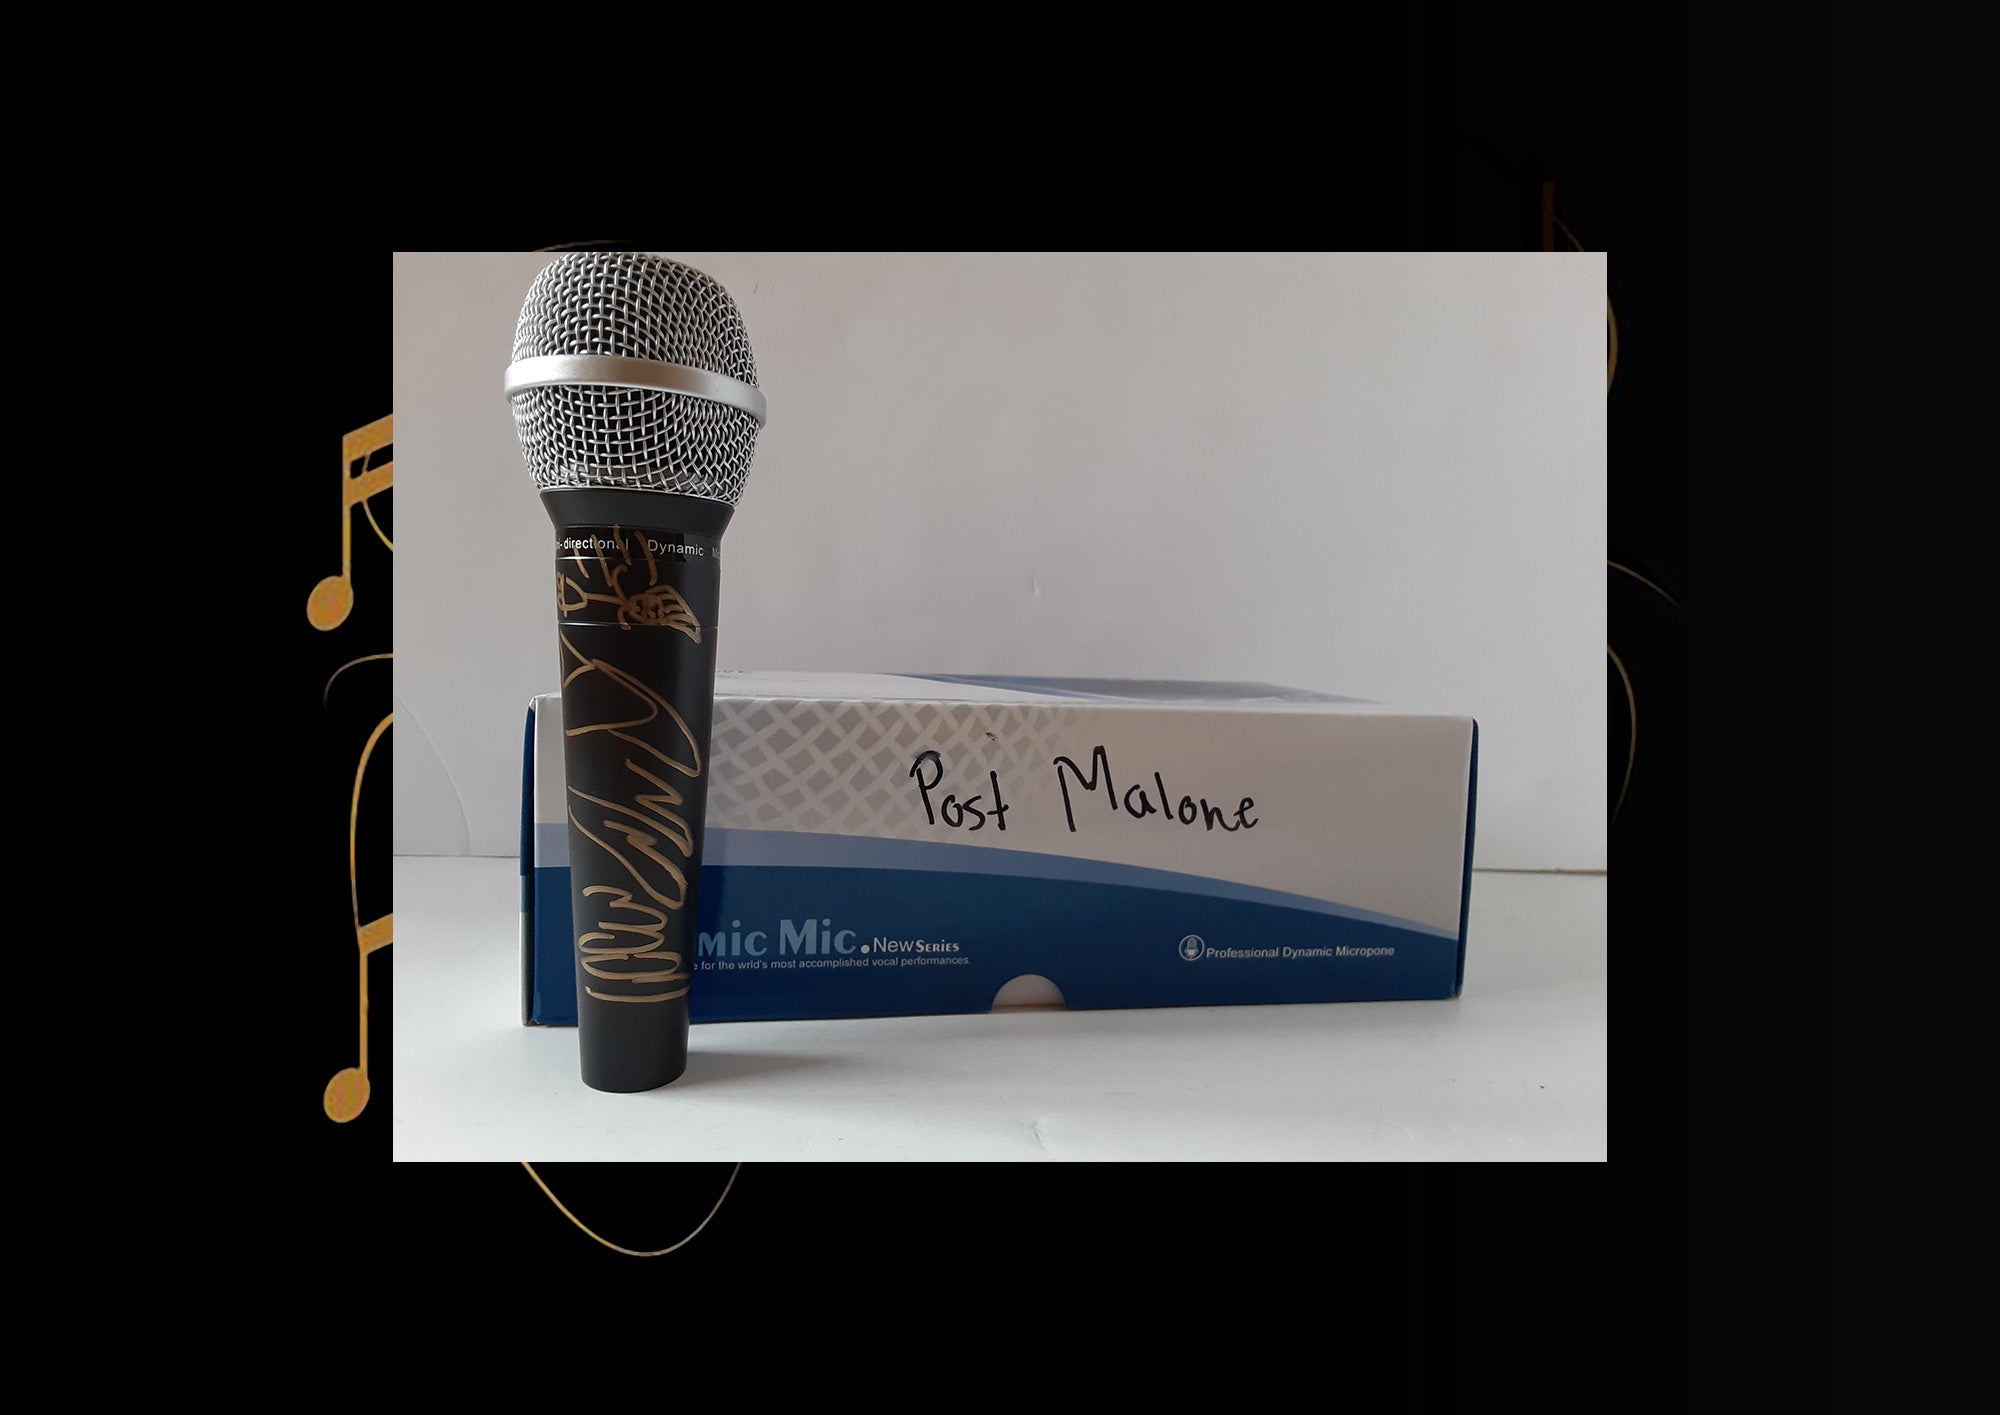 Post Malone-Austin Richard Post signed microphone with proof